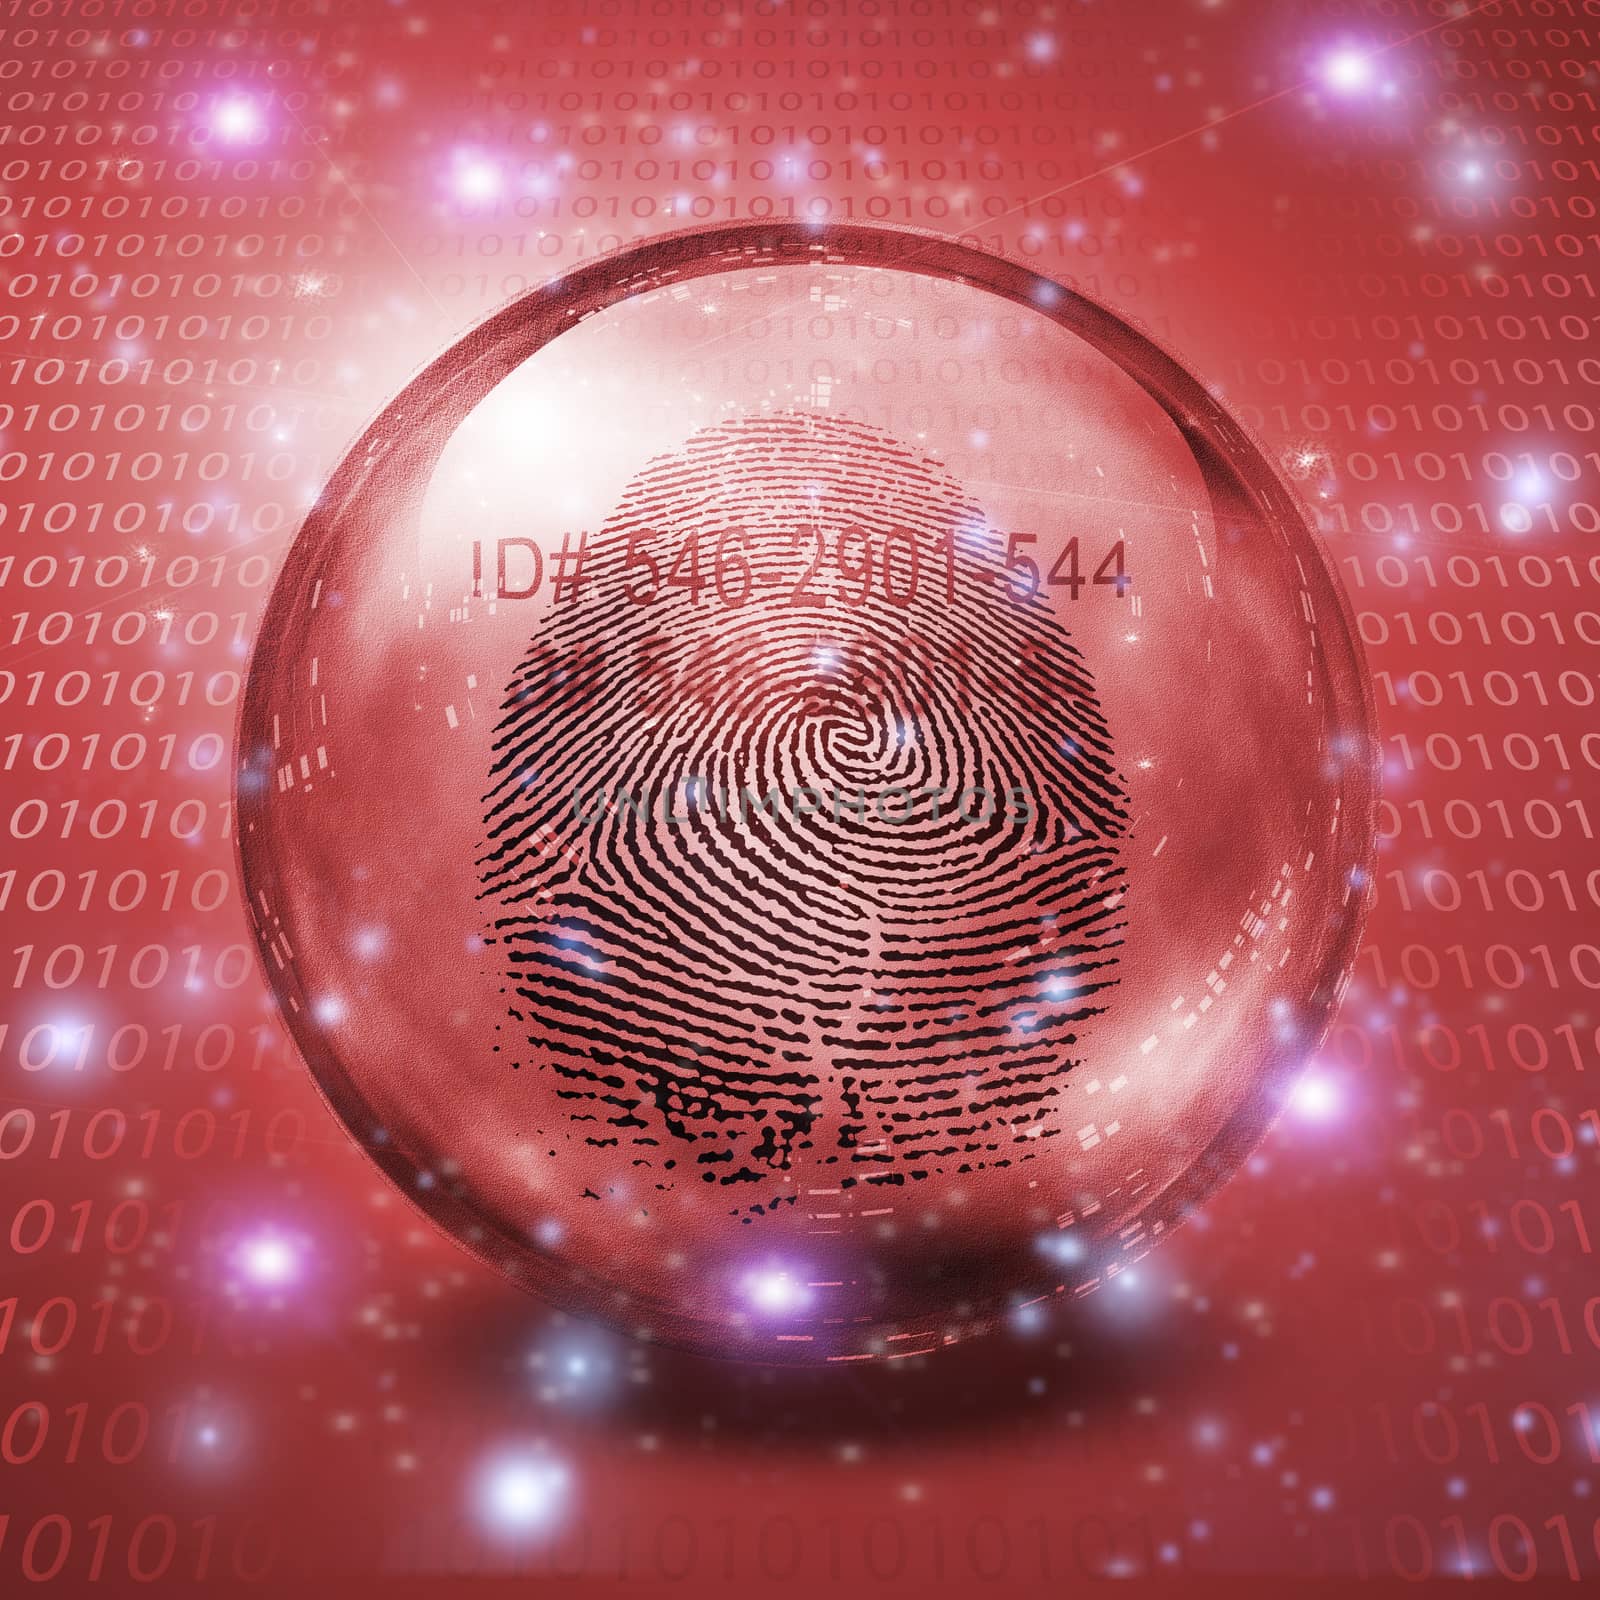 Fingerprint contained in glass sphere with Id Number